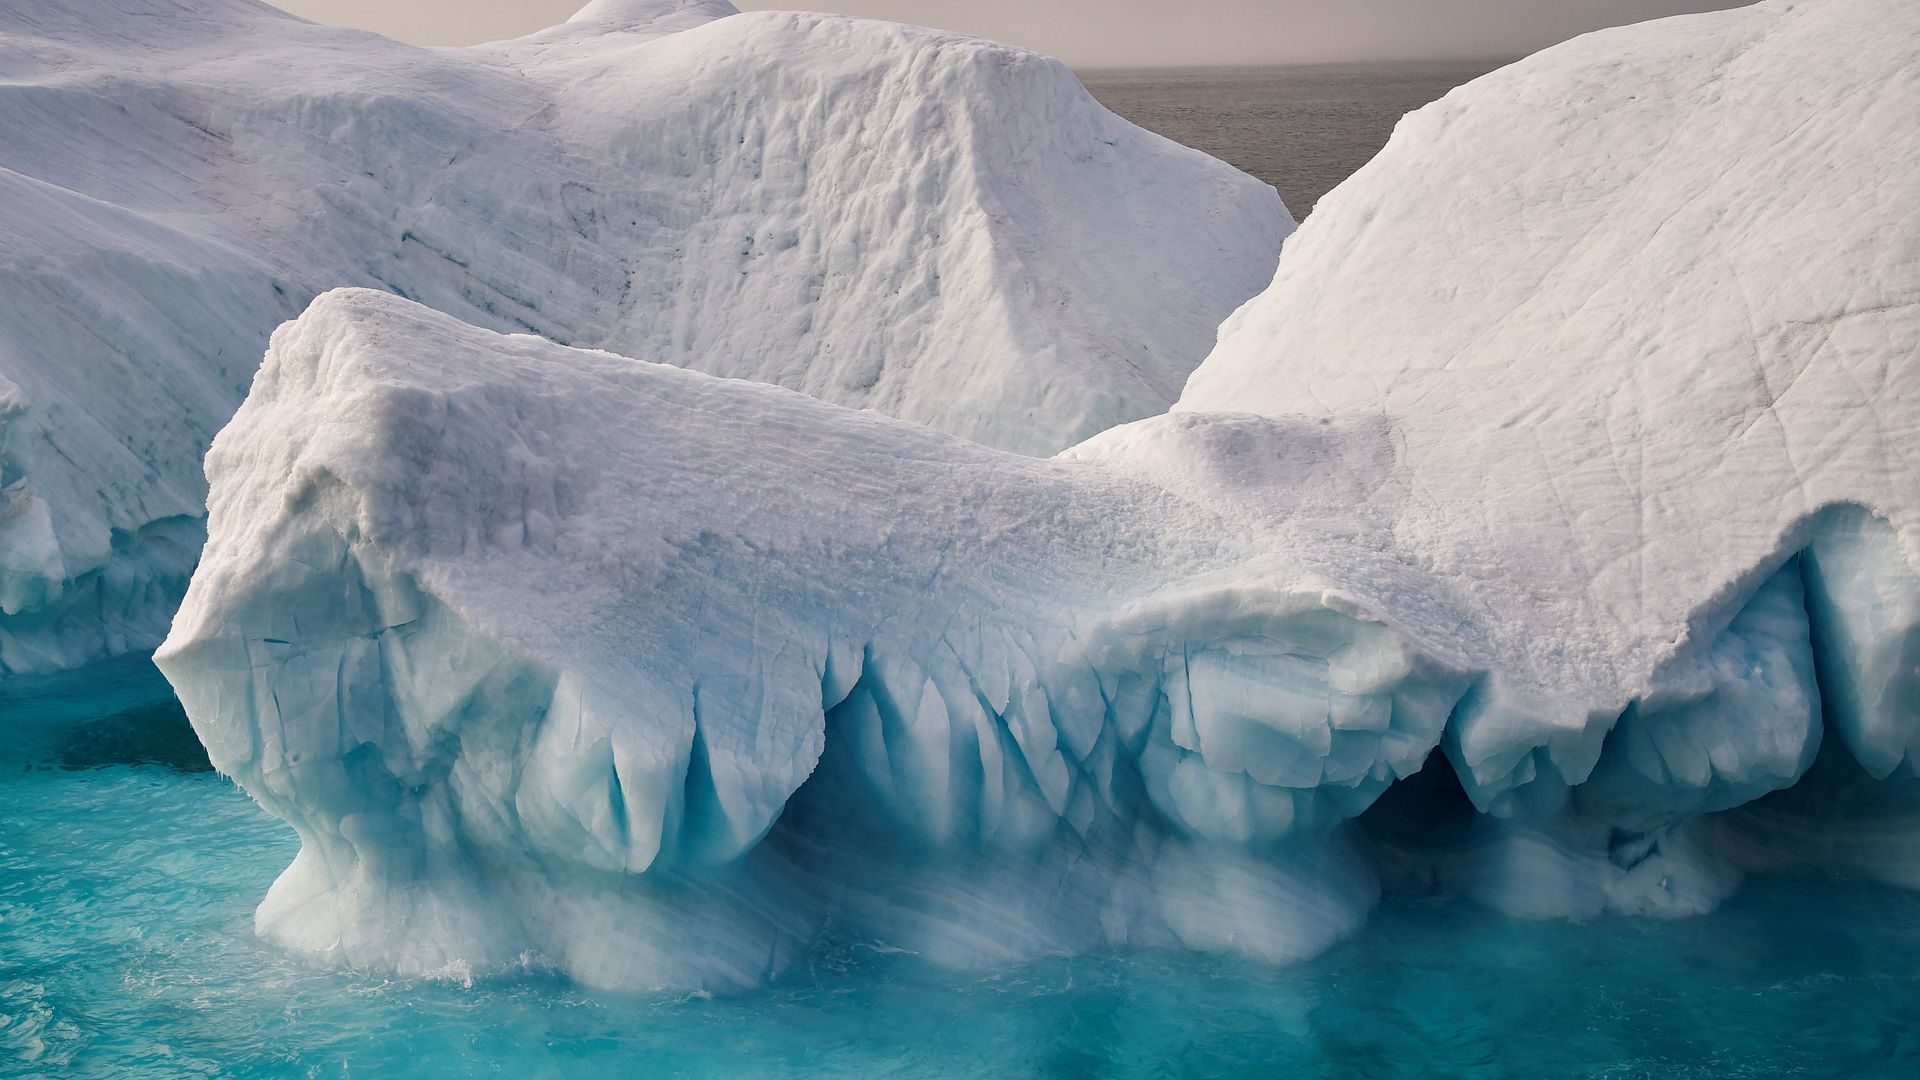 Icebergs are seen in the Arctic Ocean off the Franz Josef Land archipelago.